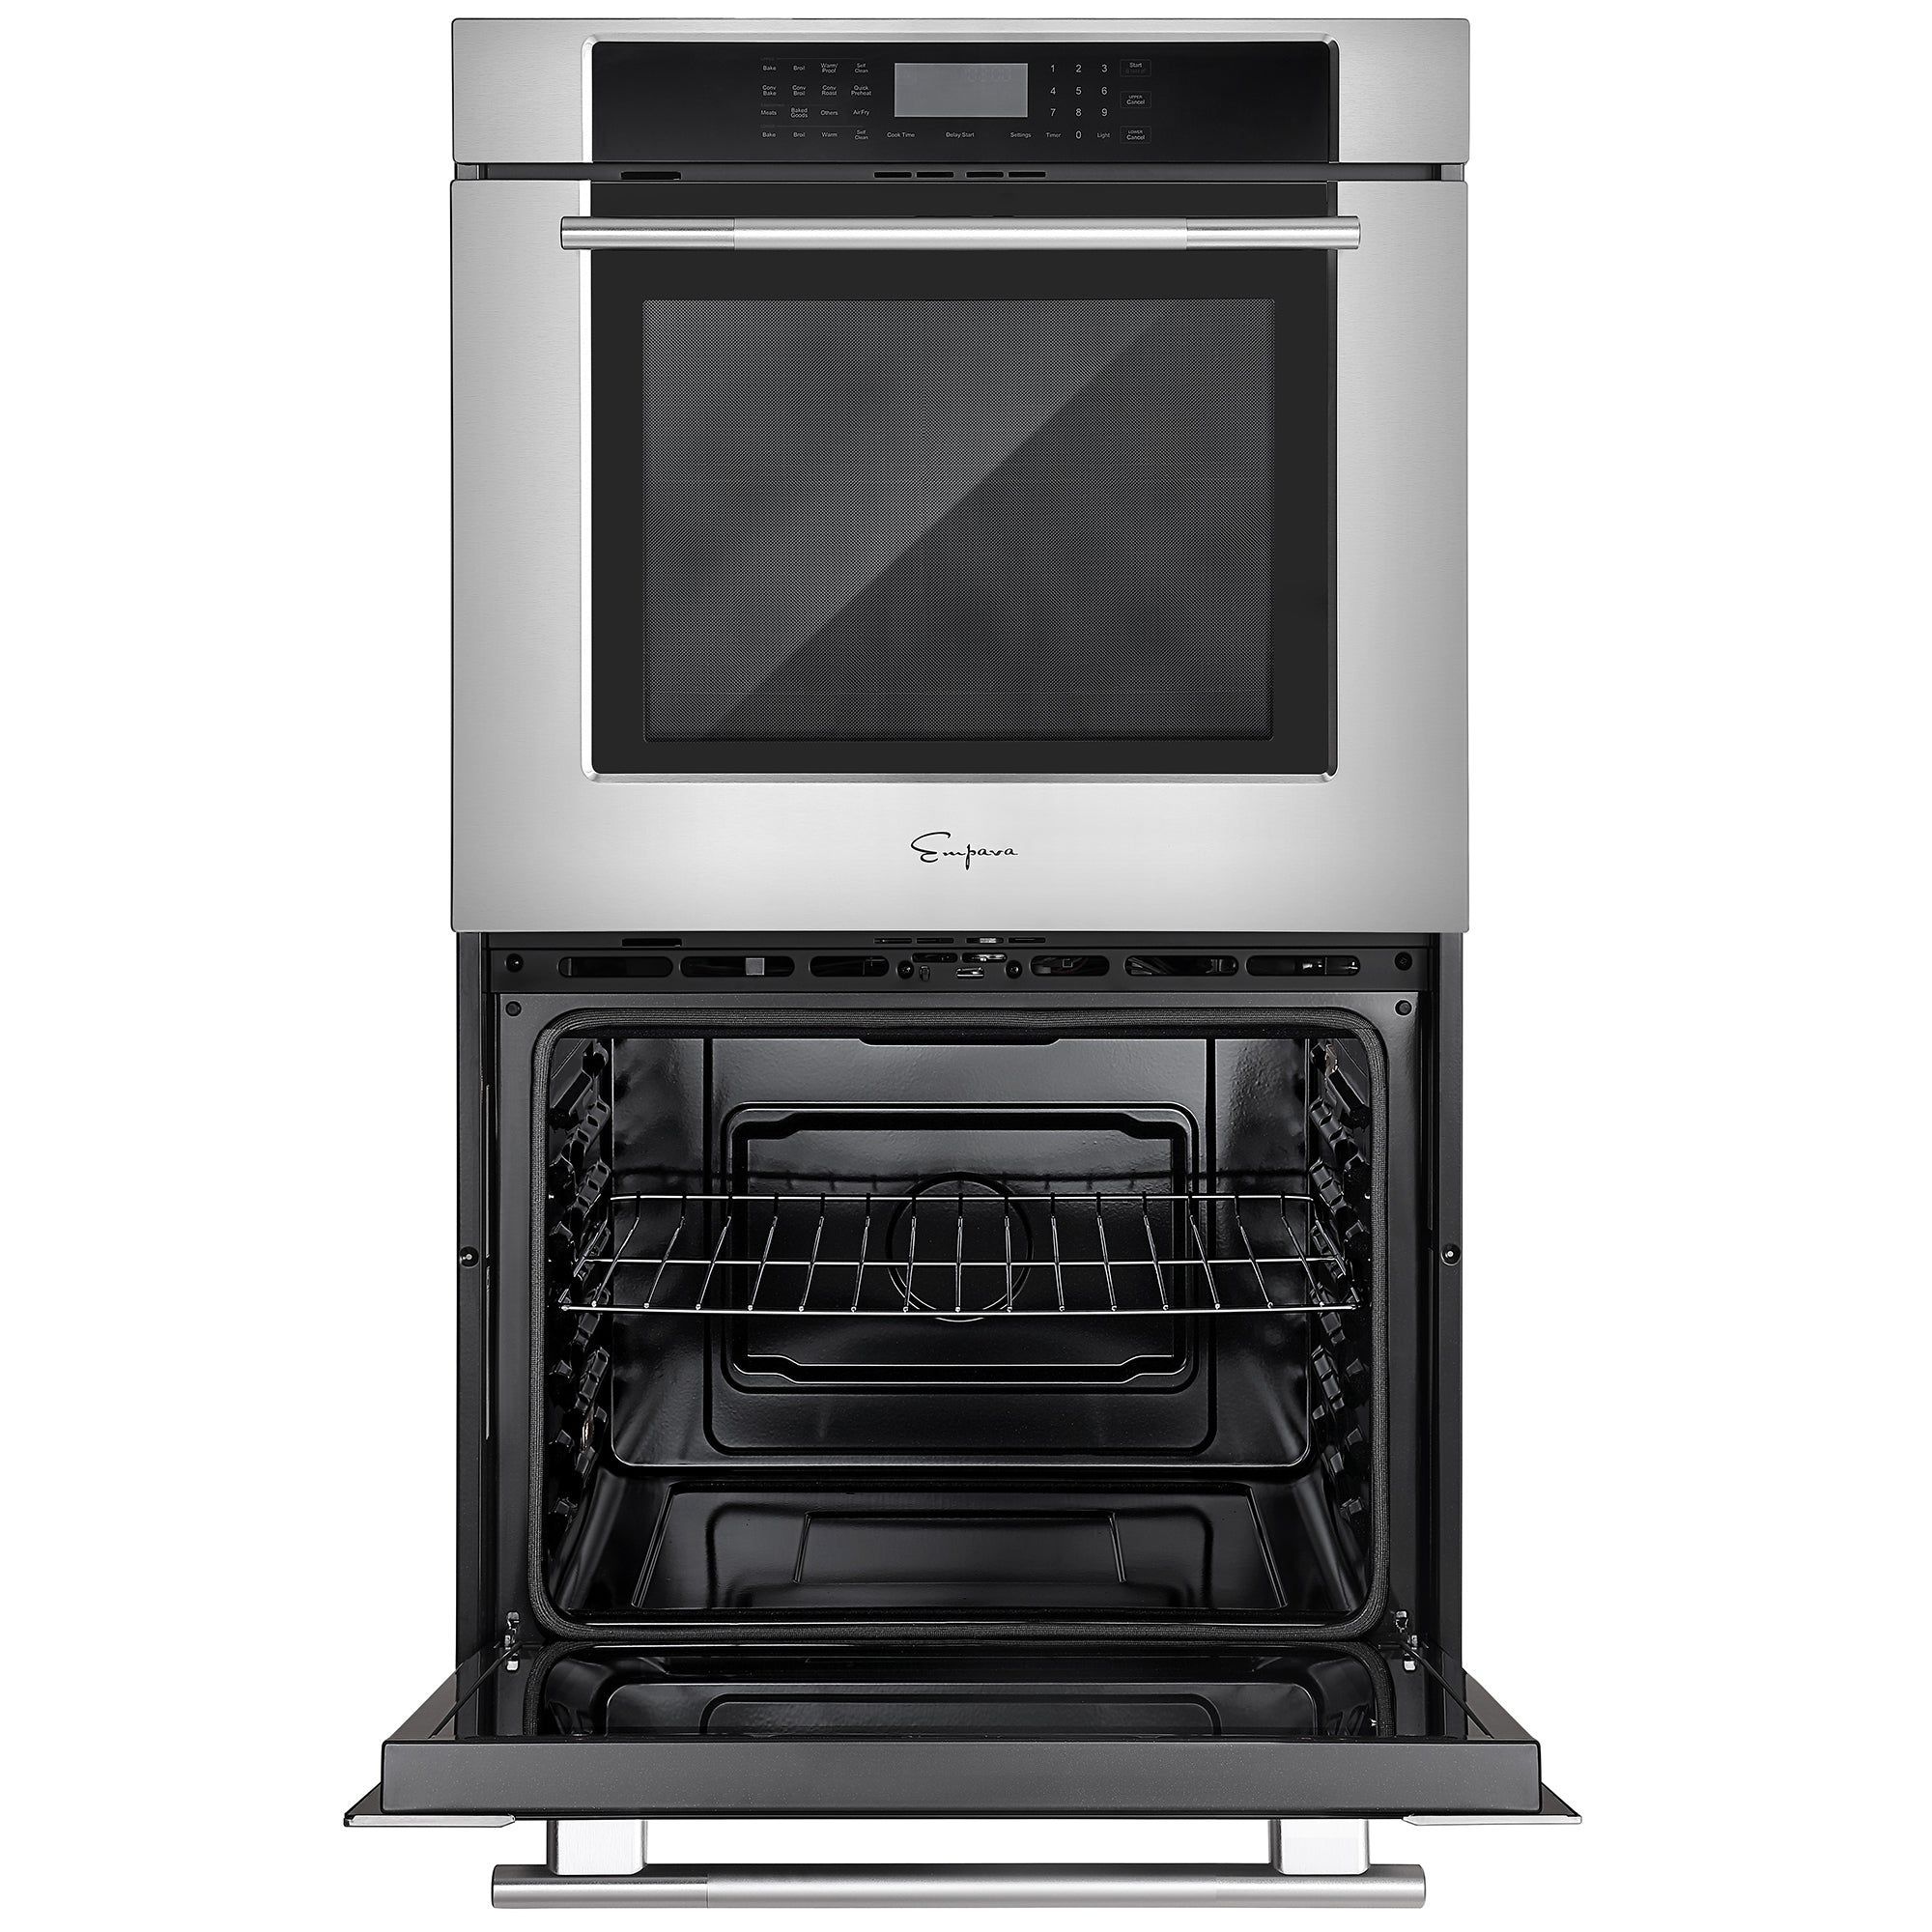 Empava 30" 30WO05 Electric Double Wall Oven